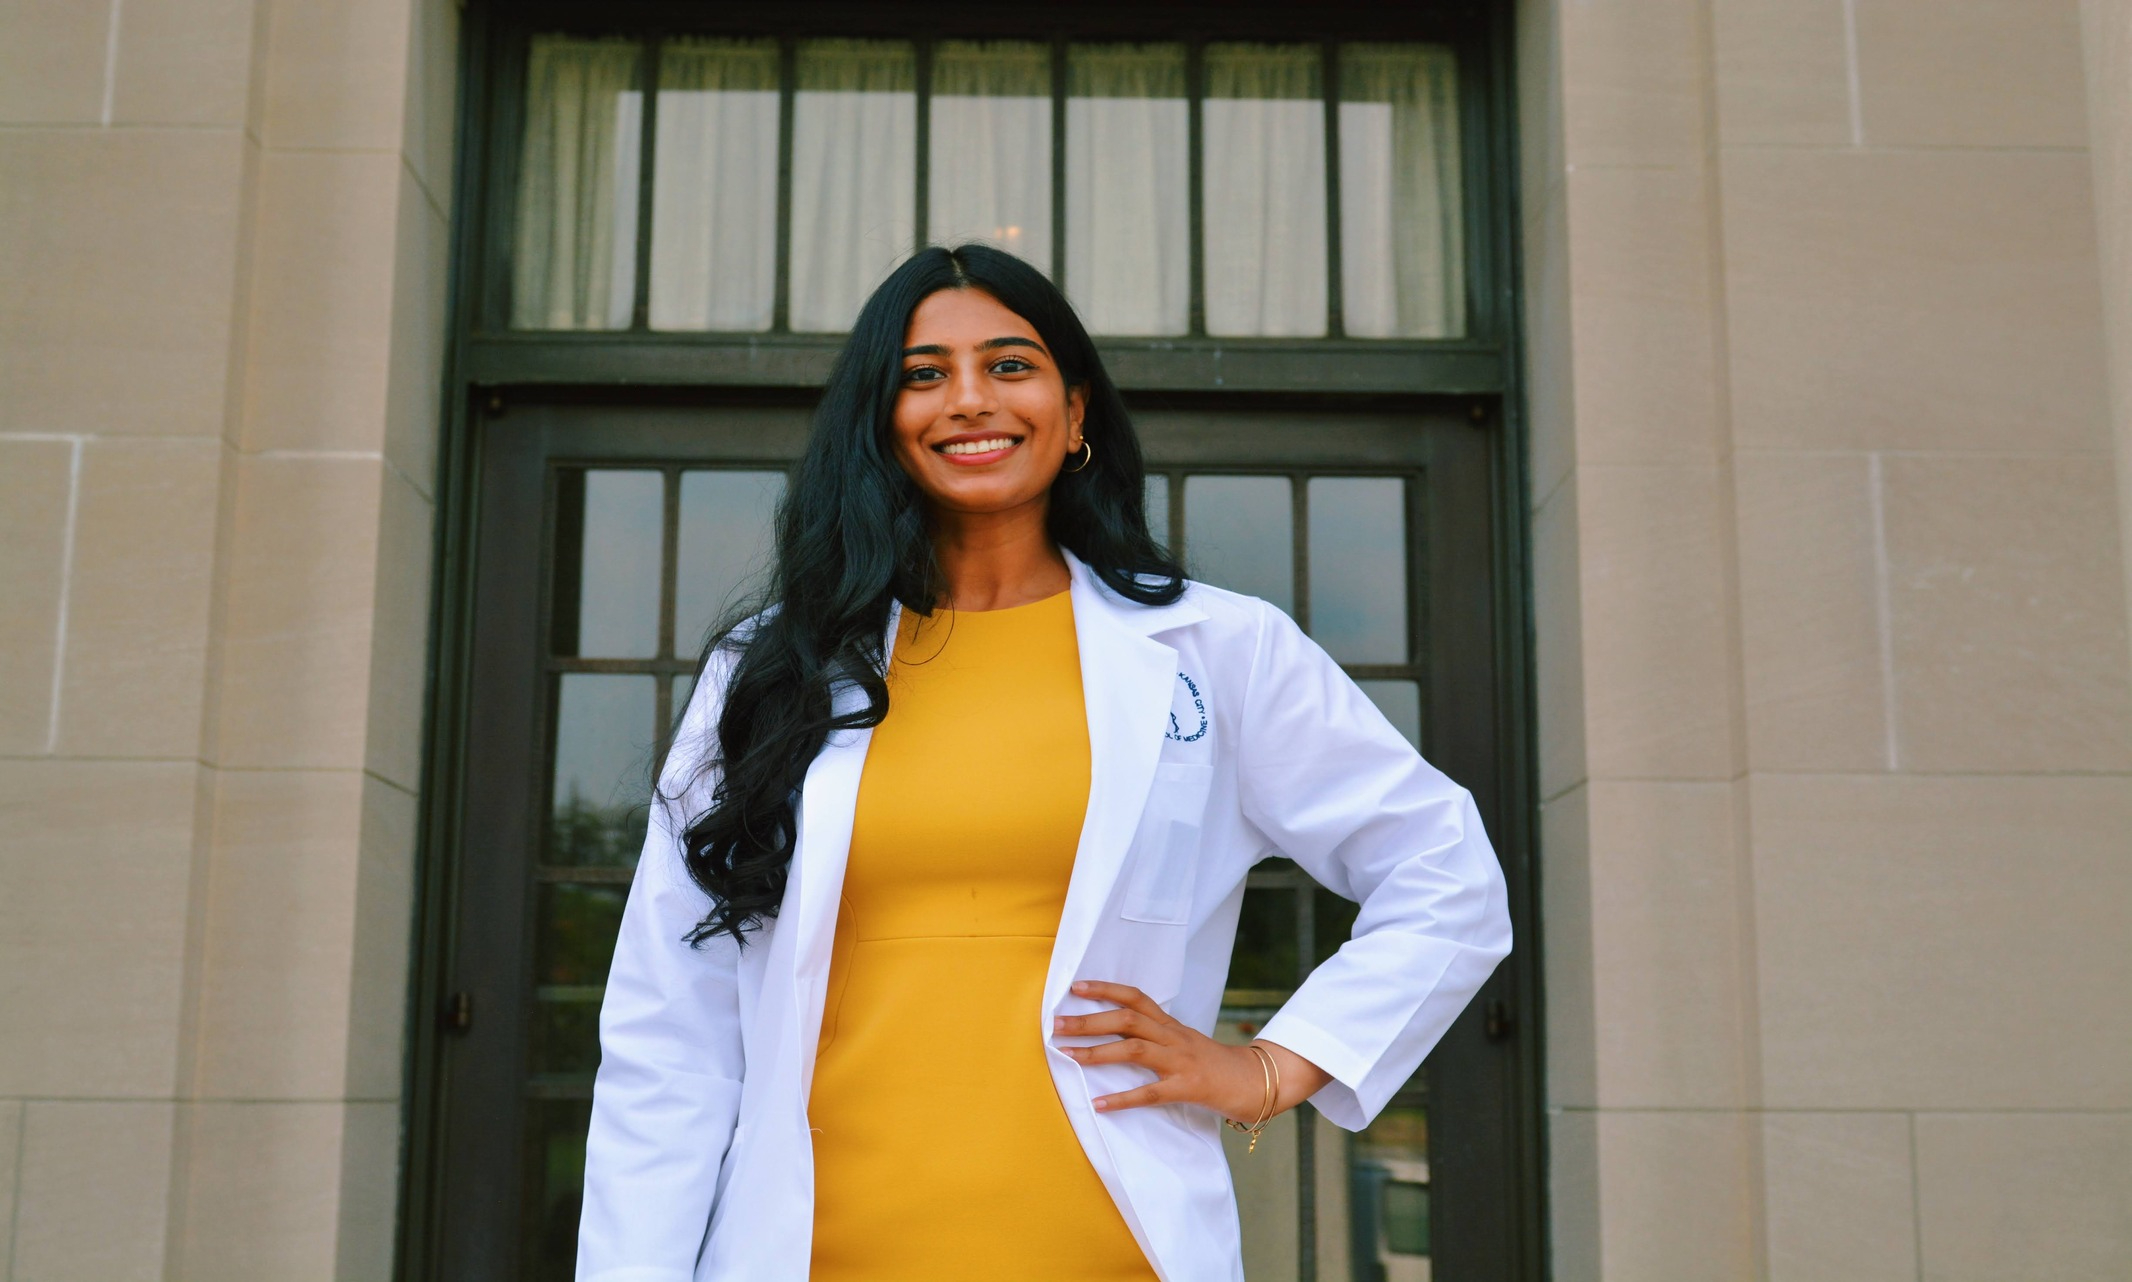 Smiling woman in a yellow dress and white coat